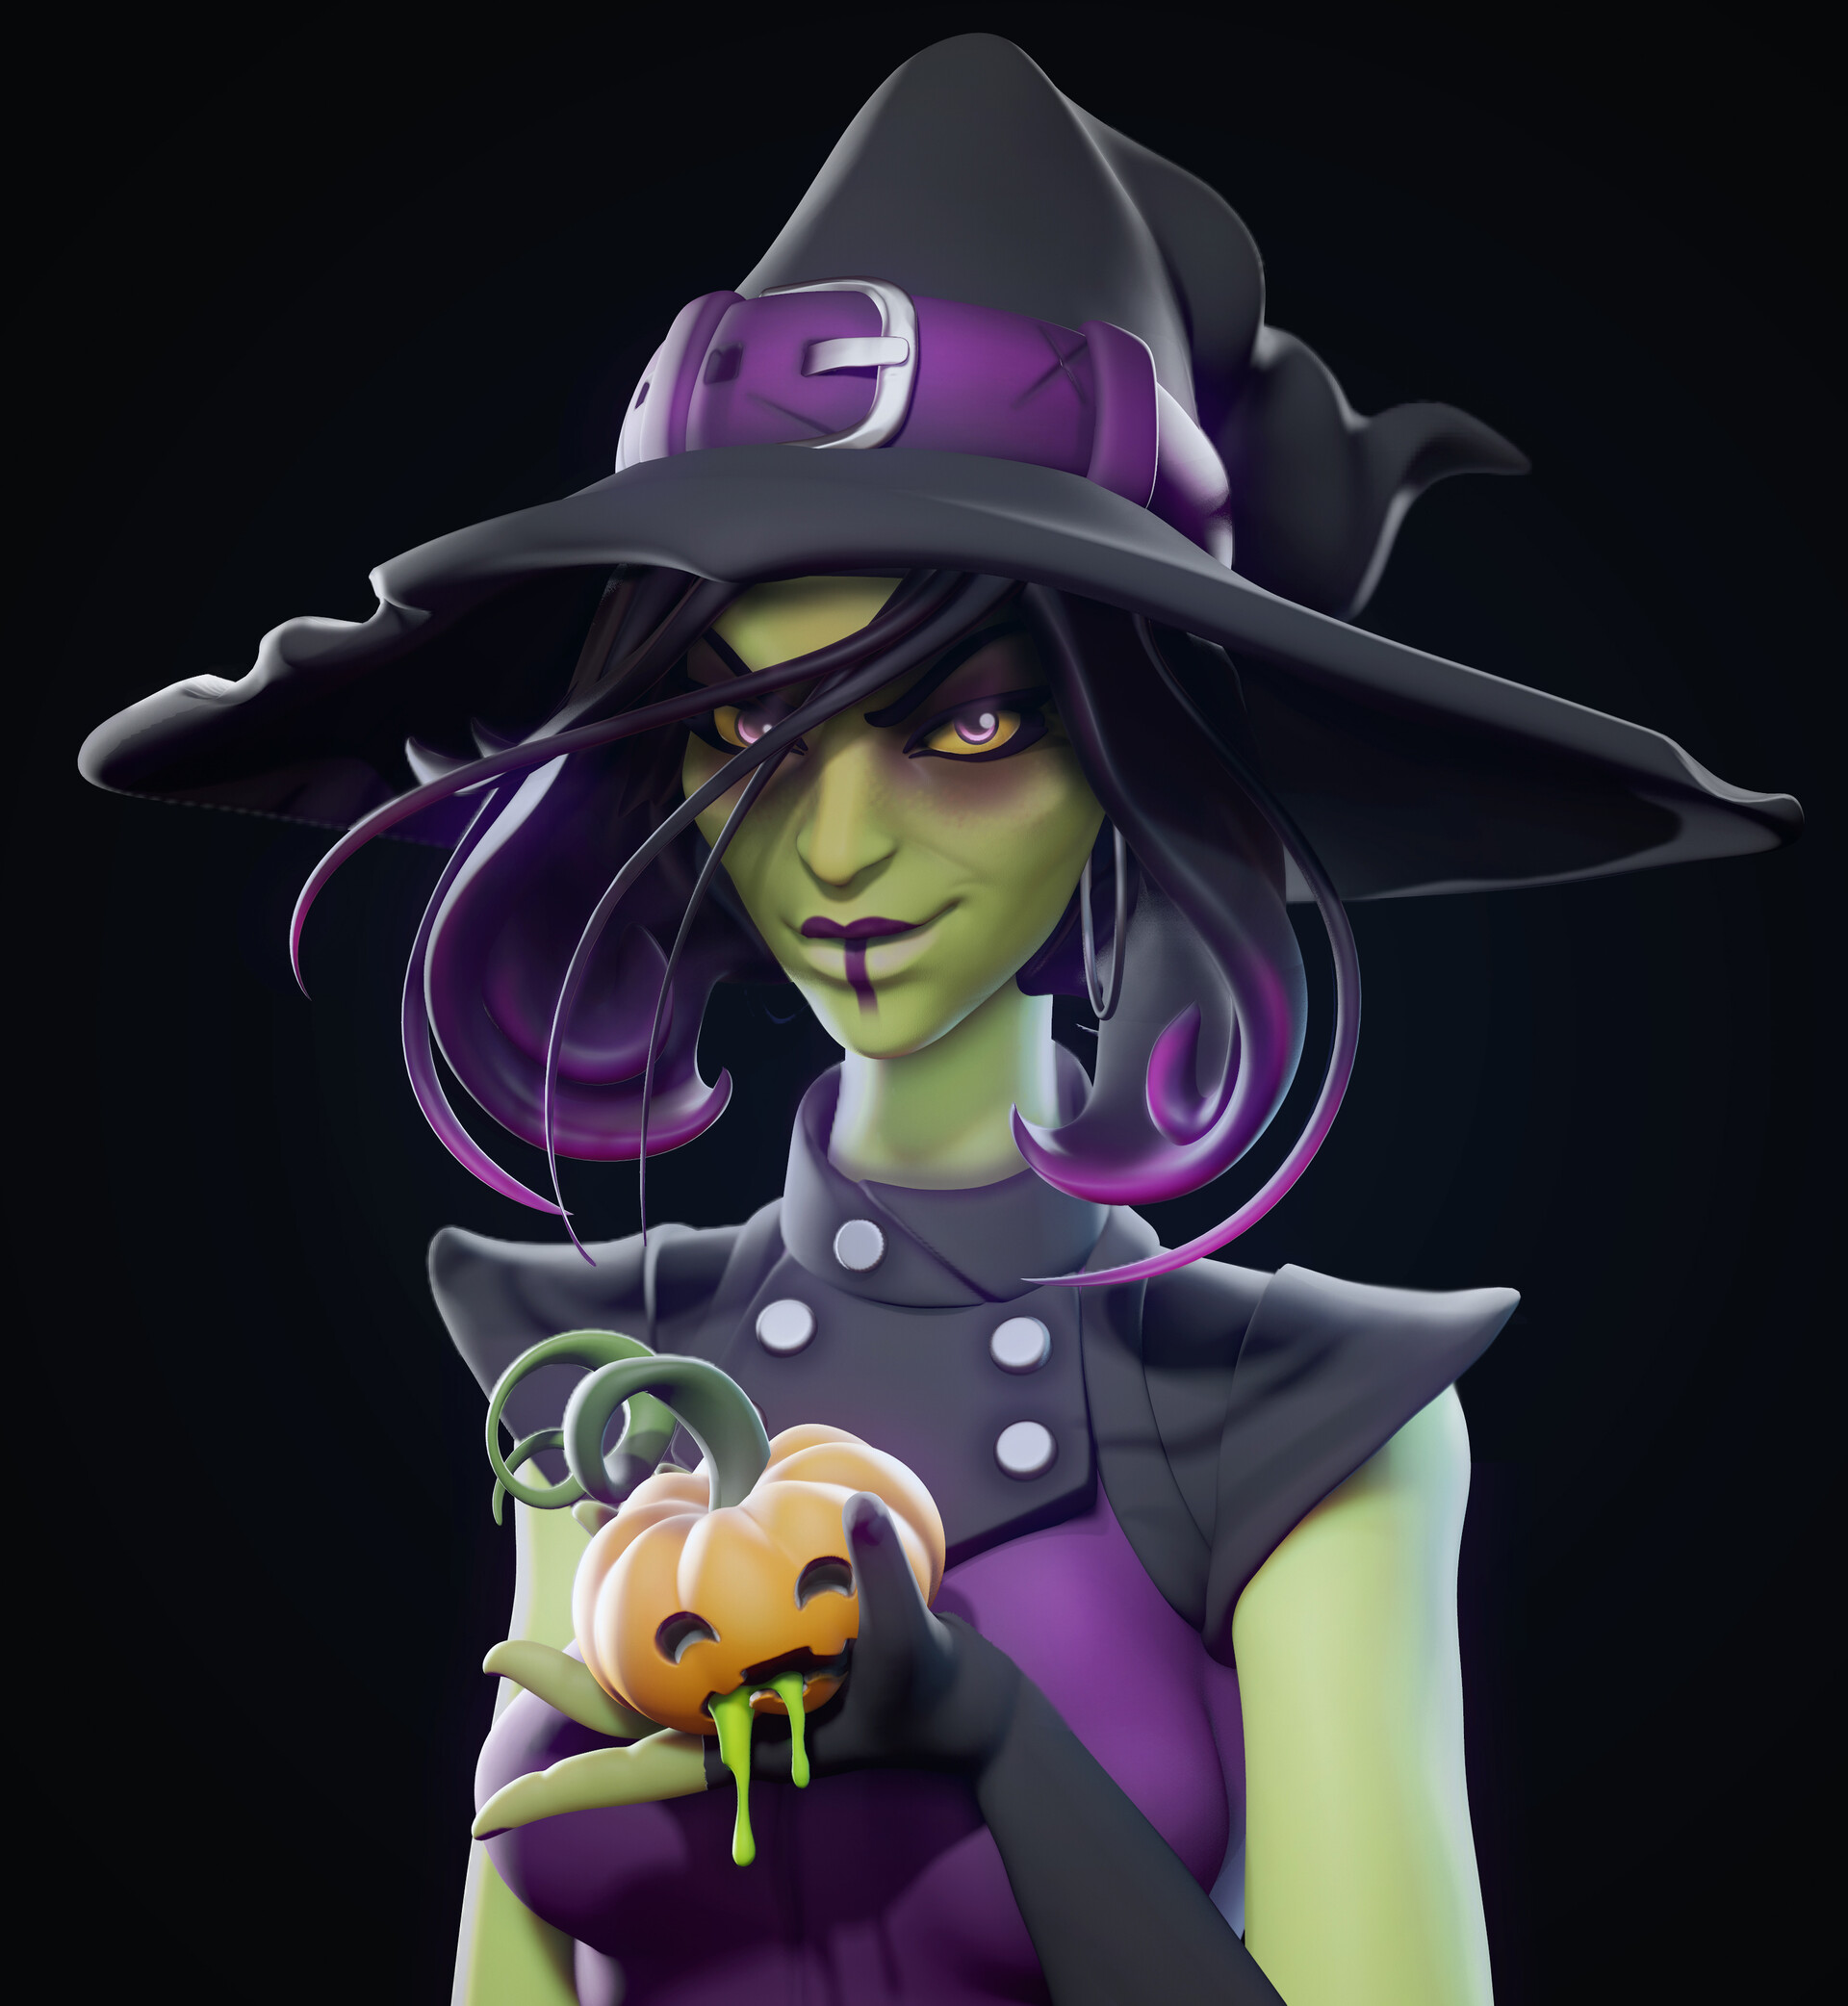 Elphaba - the wicked witch of the west.